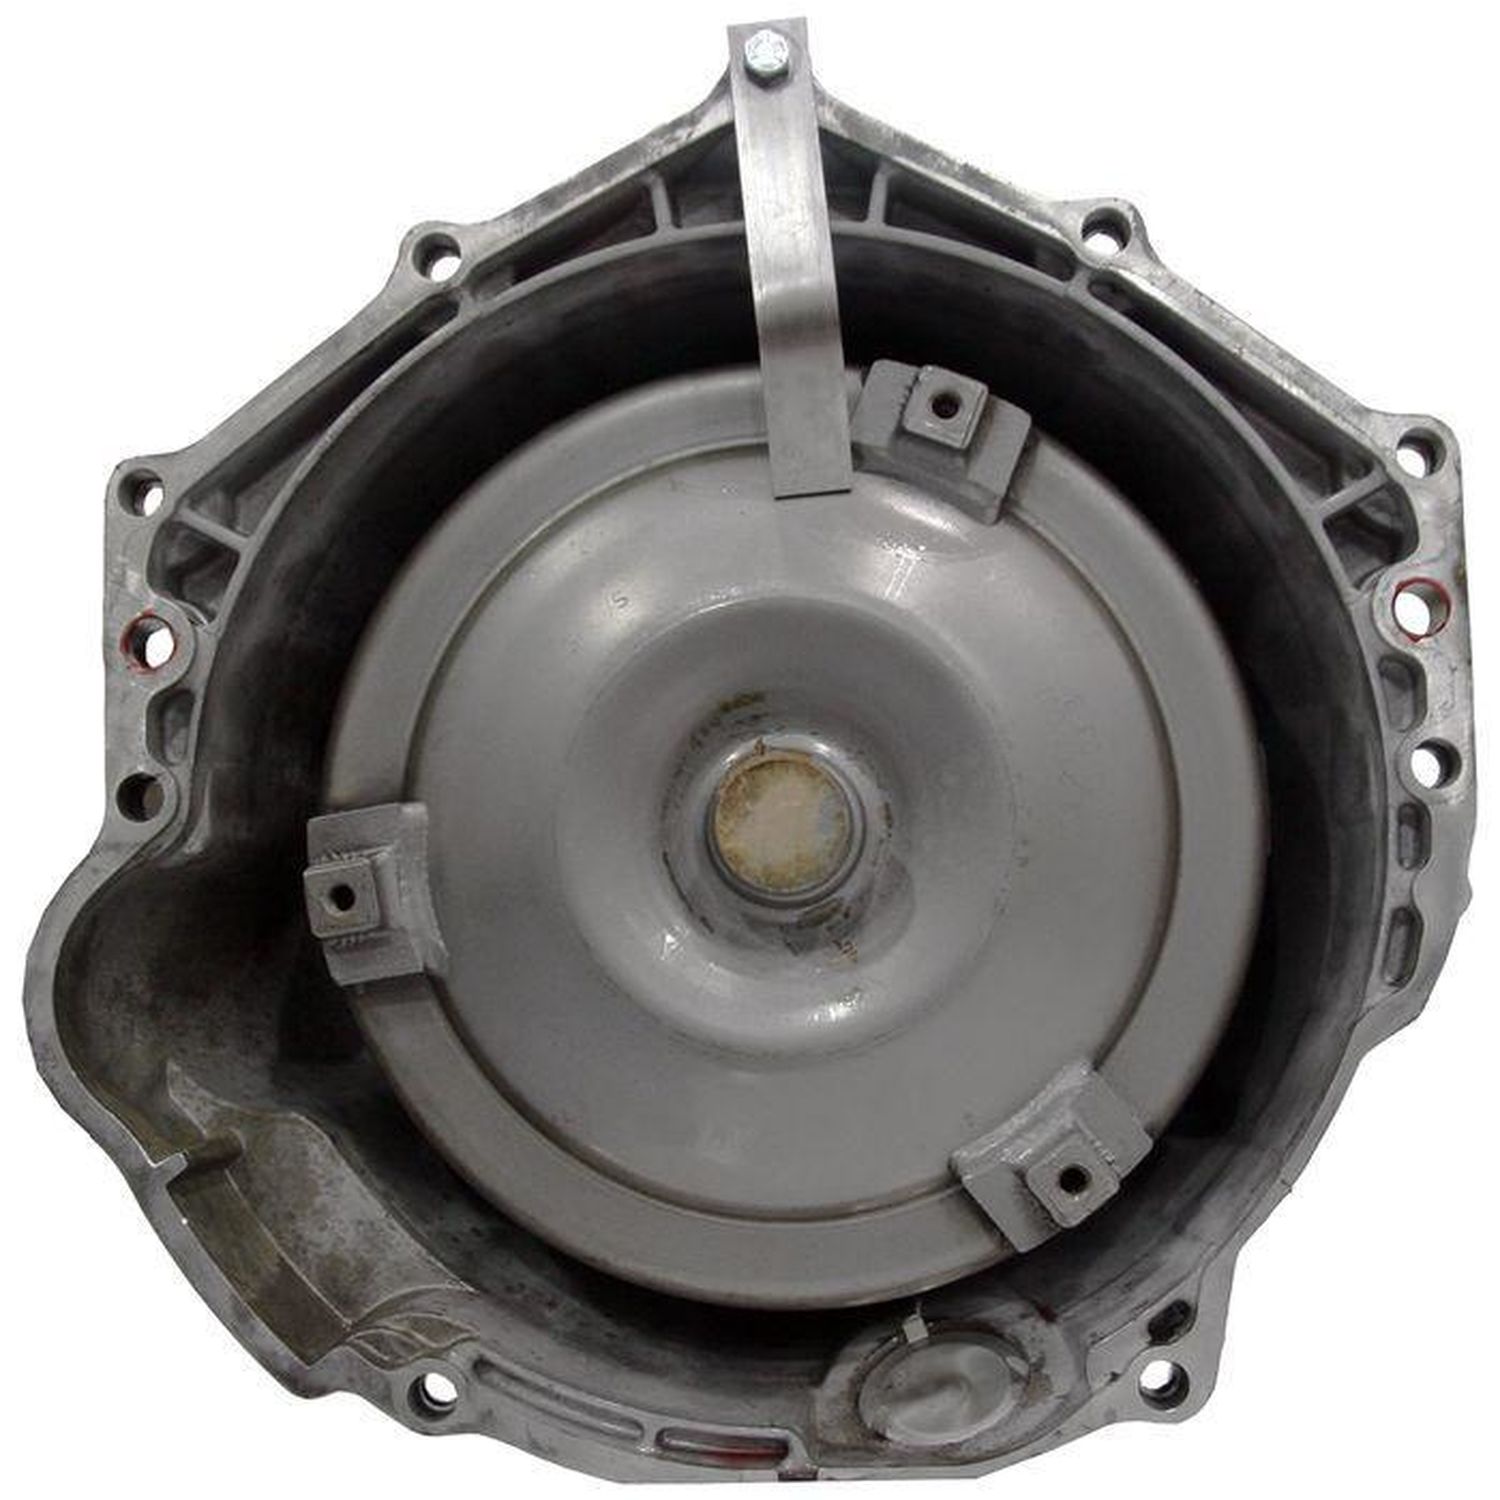 Moveras Remanufactured Automatic Transmission Assembly M01396